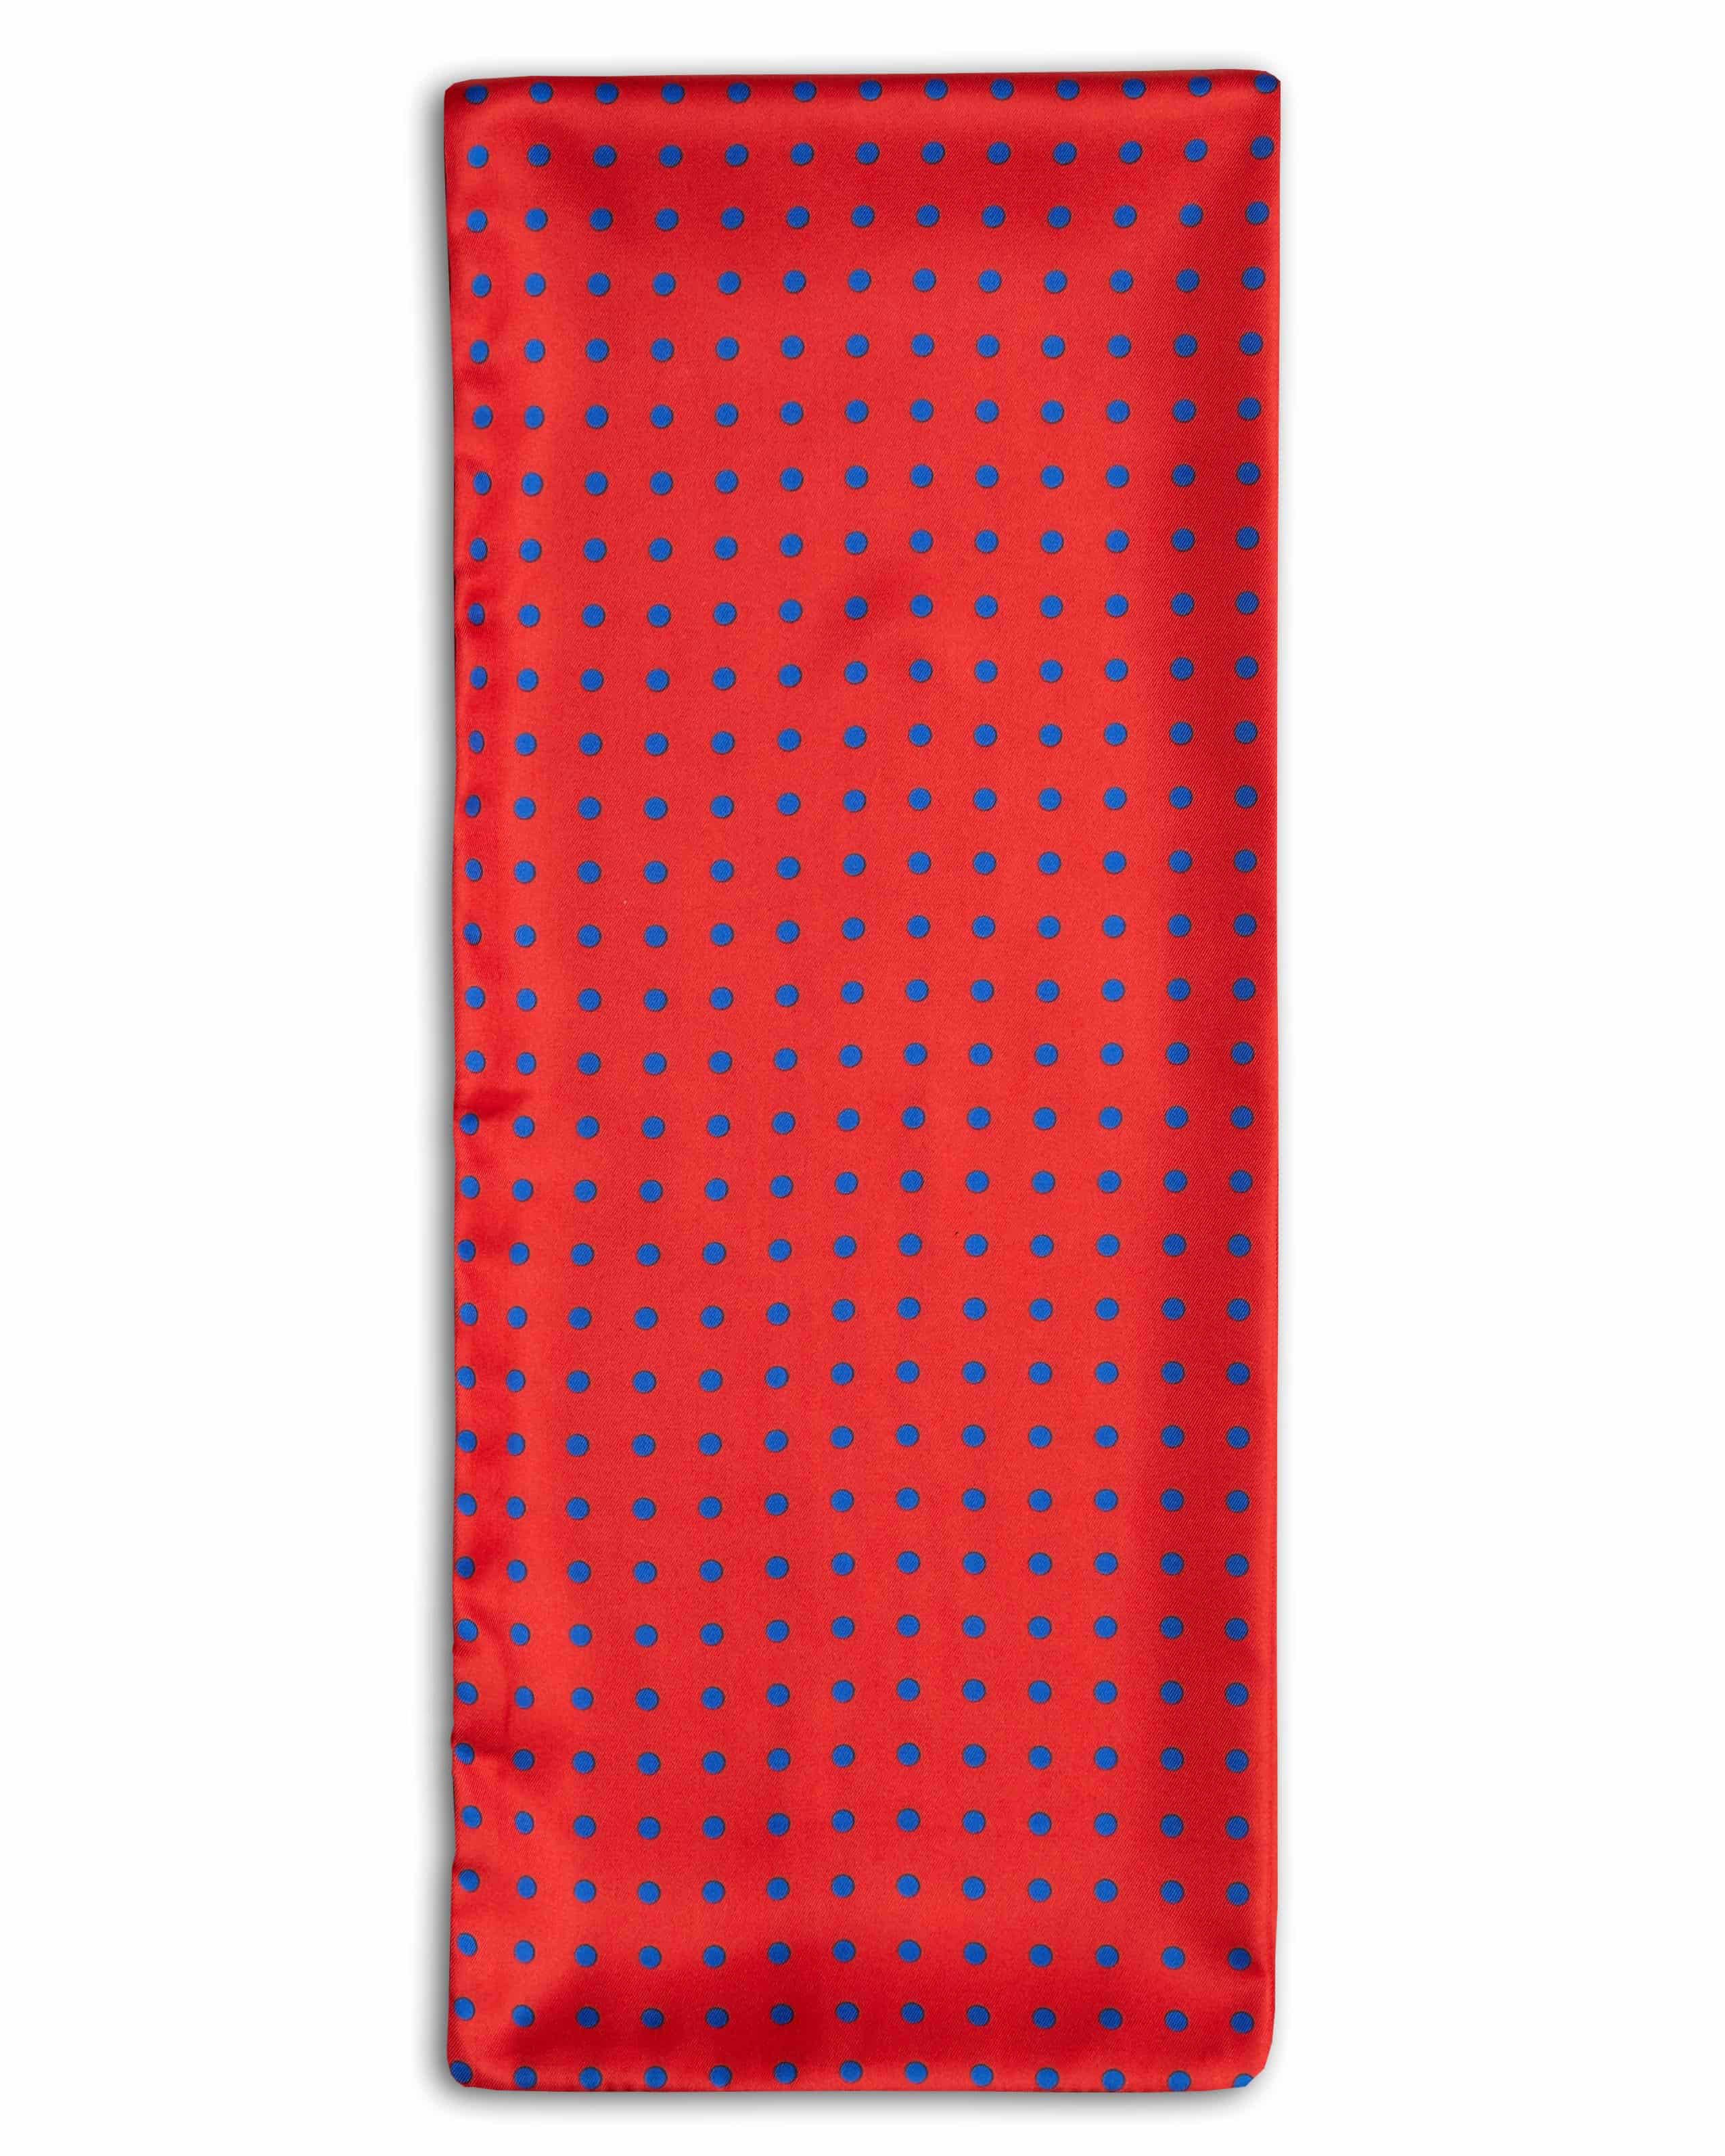 'The Dickson' polka-dot polyester scarf arranged in a rectangular shape, clearly showing the red coloured fabric with blue dots.